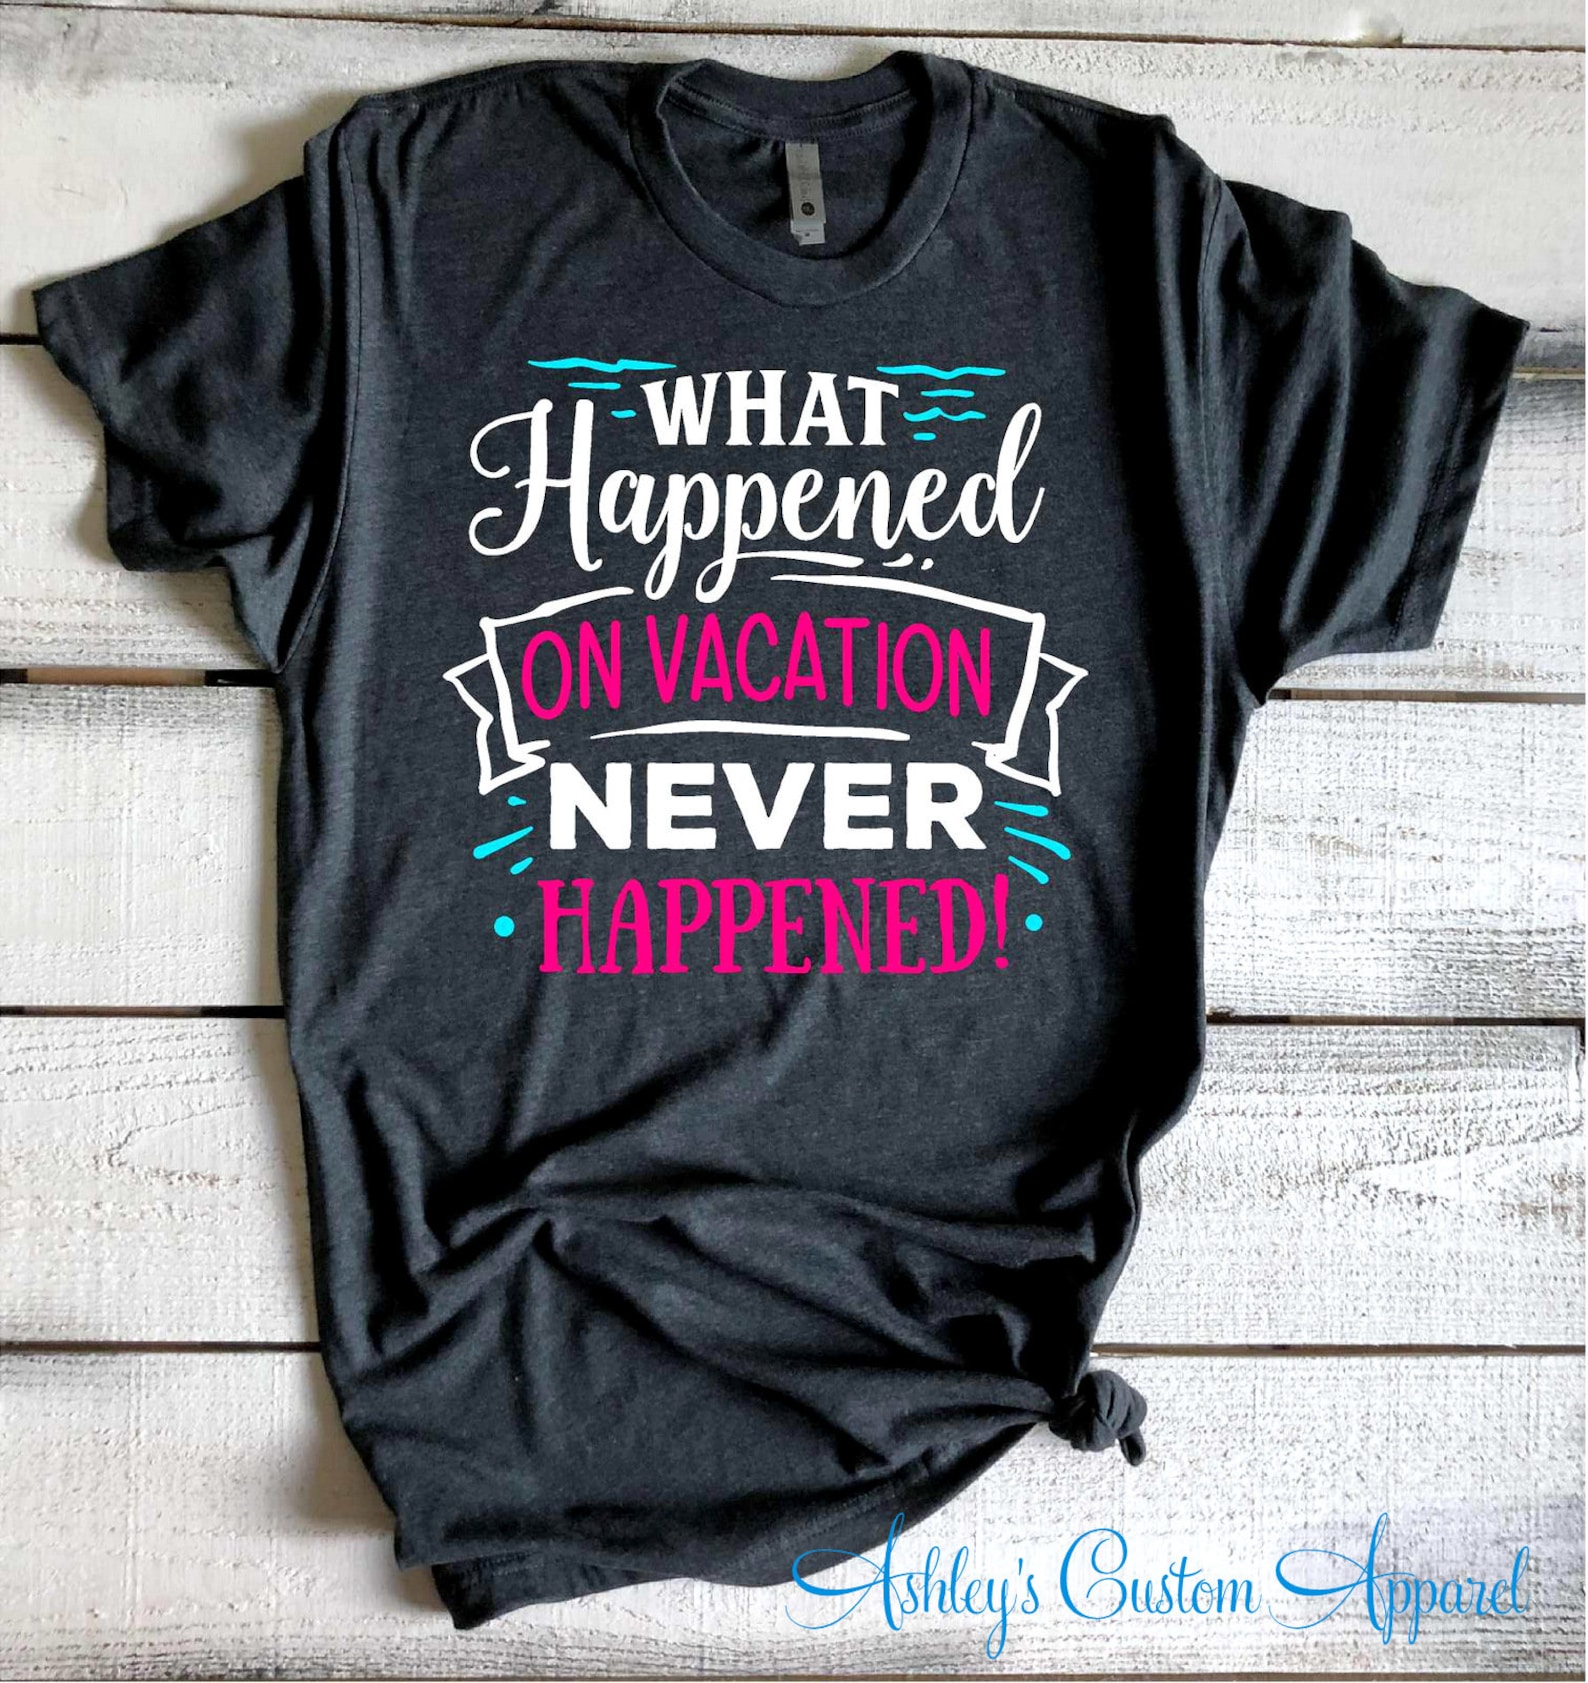 Vacation Shirts What Happens On Vacation Never Happened Family Vacation Shi...